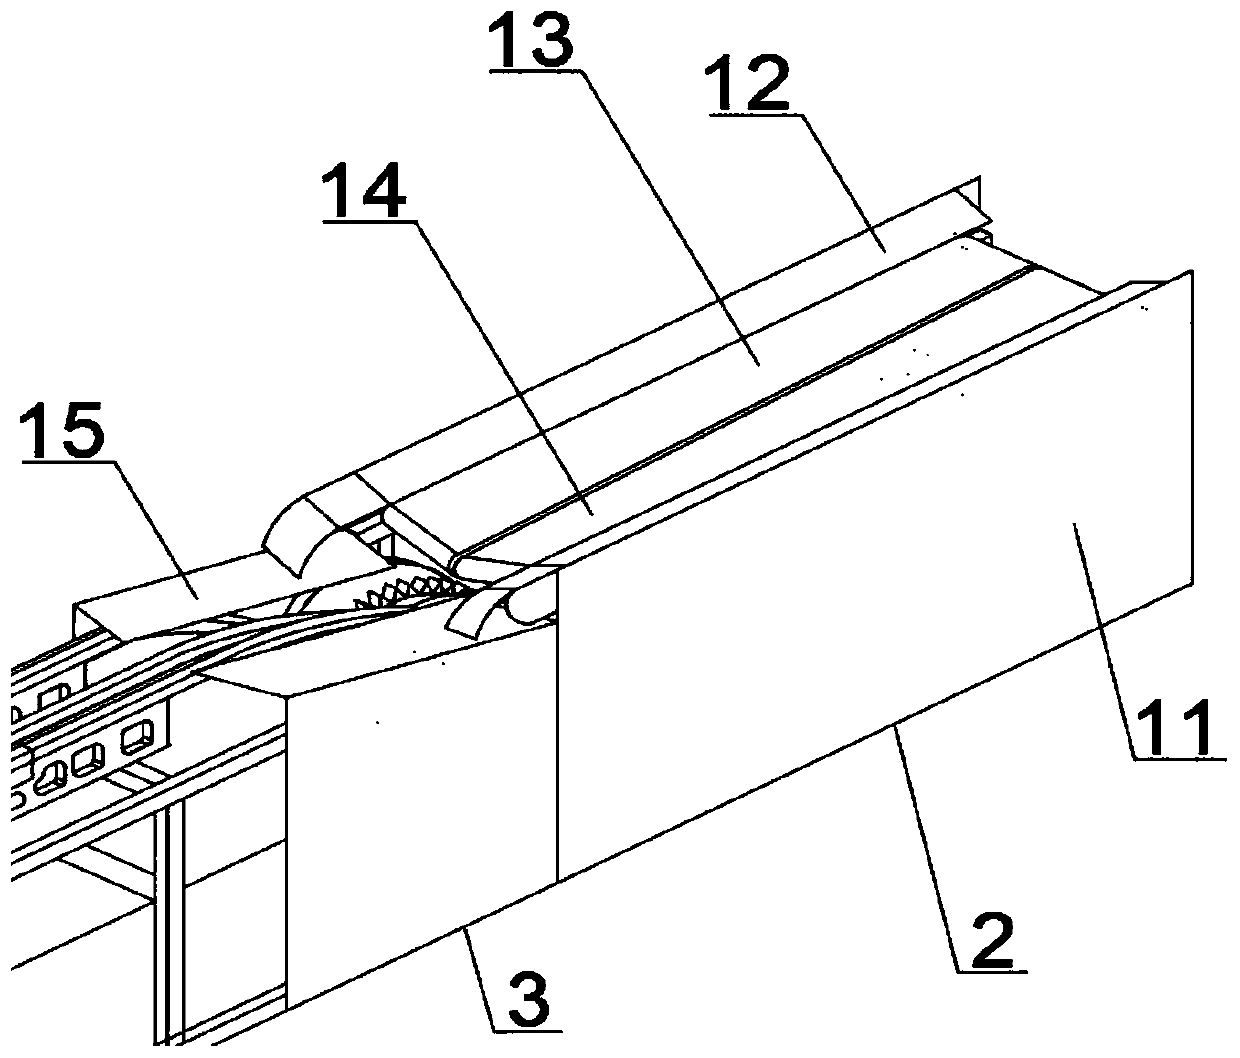 Full-automatic weighing type fruit sorting device